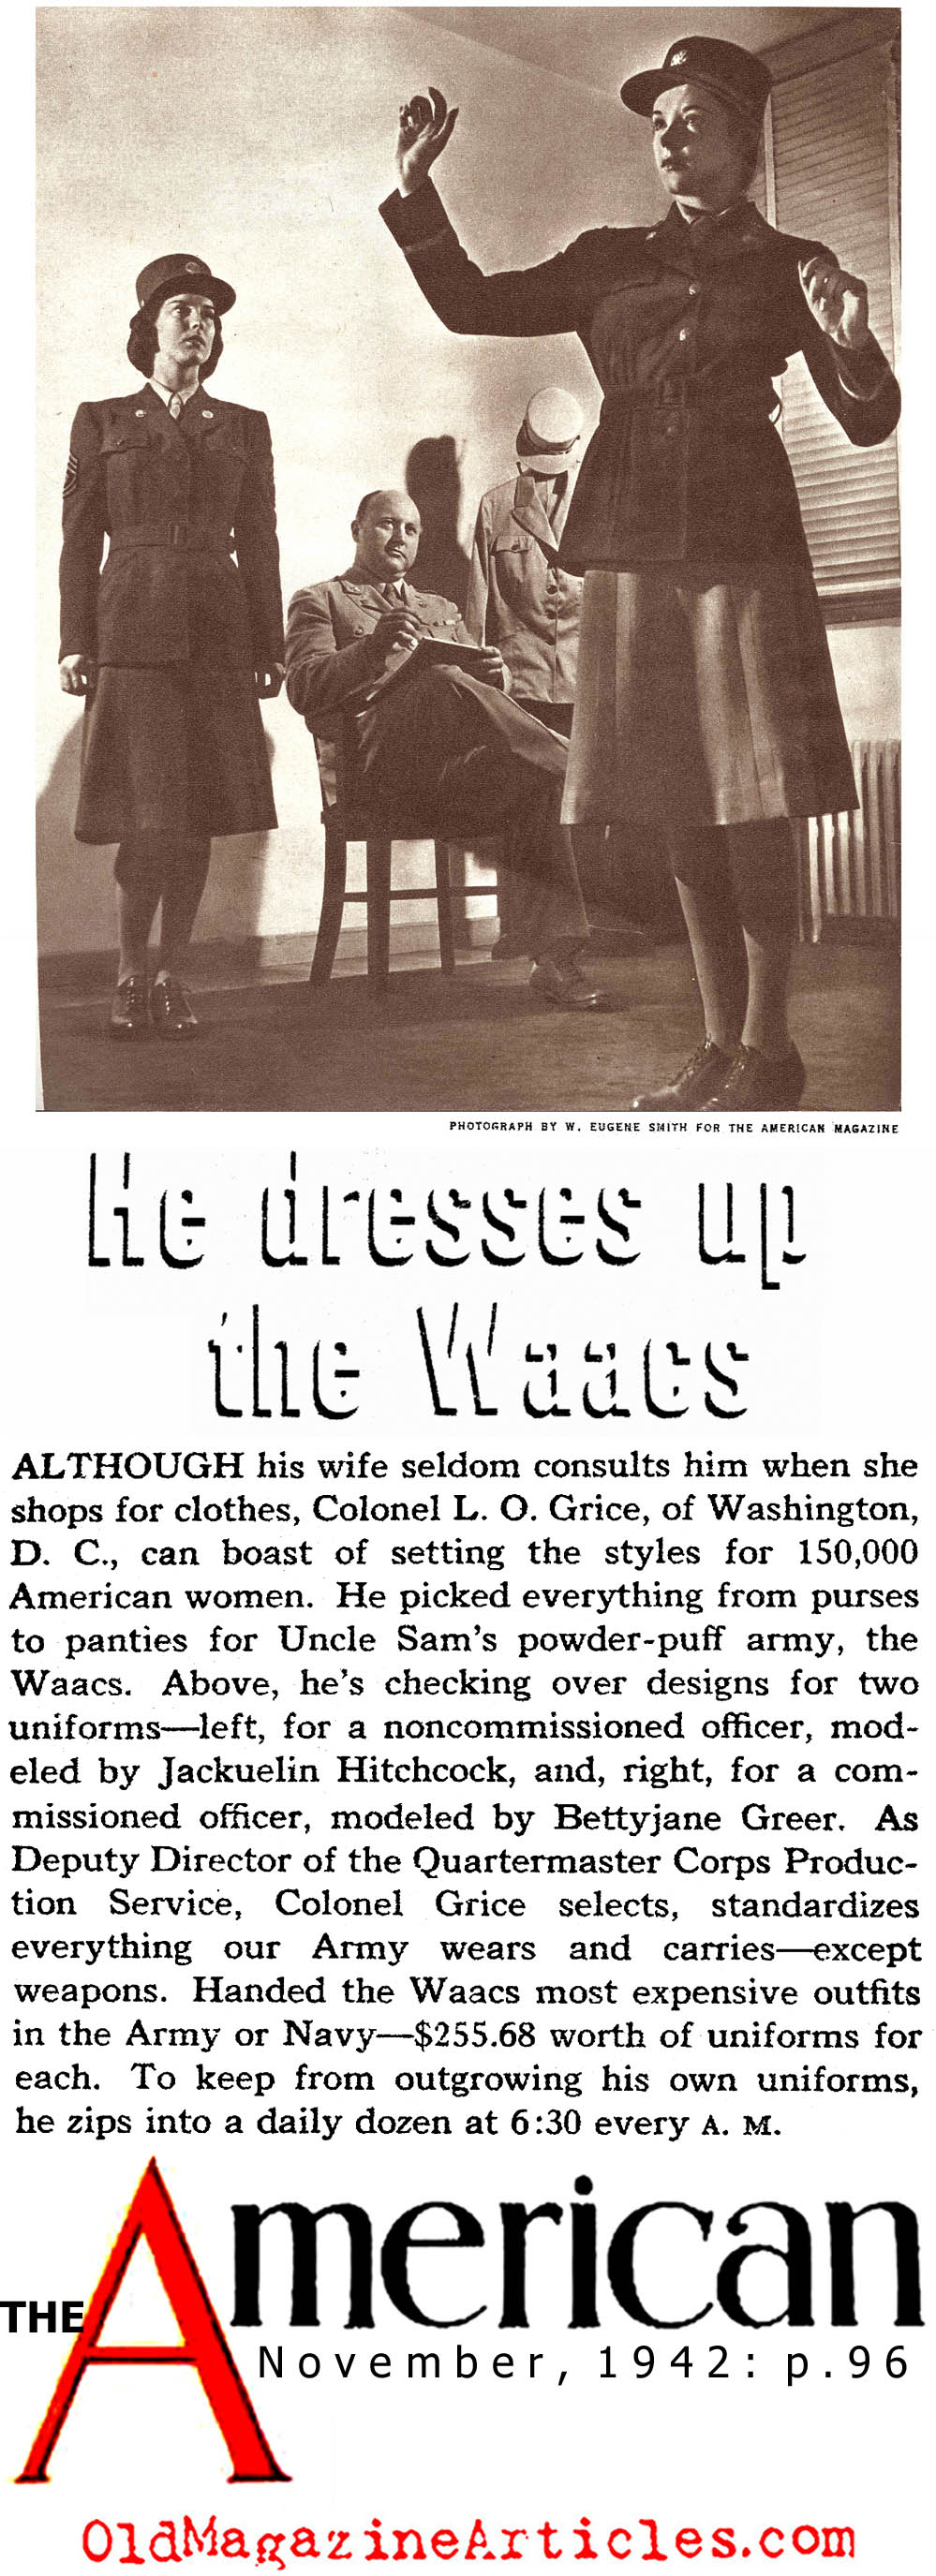 The Man Behind The WAAC Uniforms (The American Magazine, 1942)